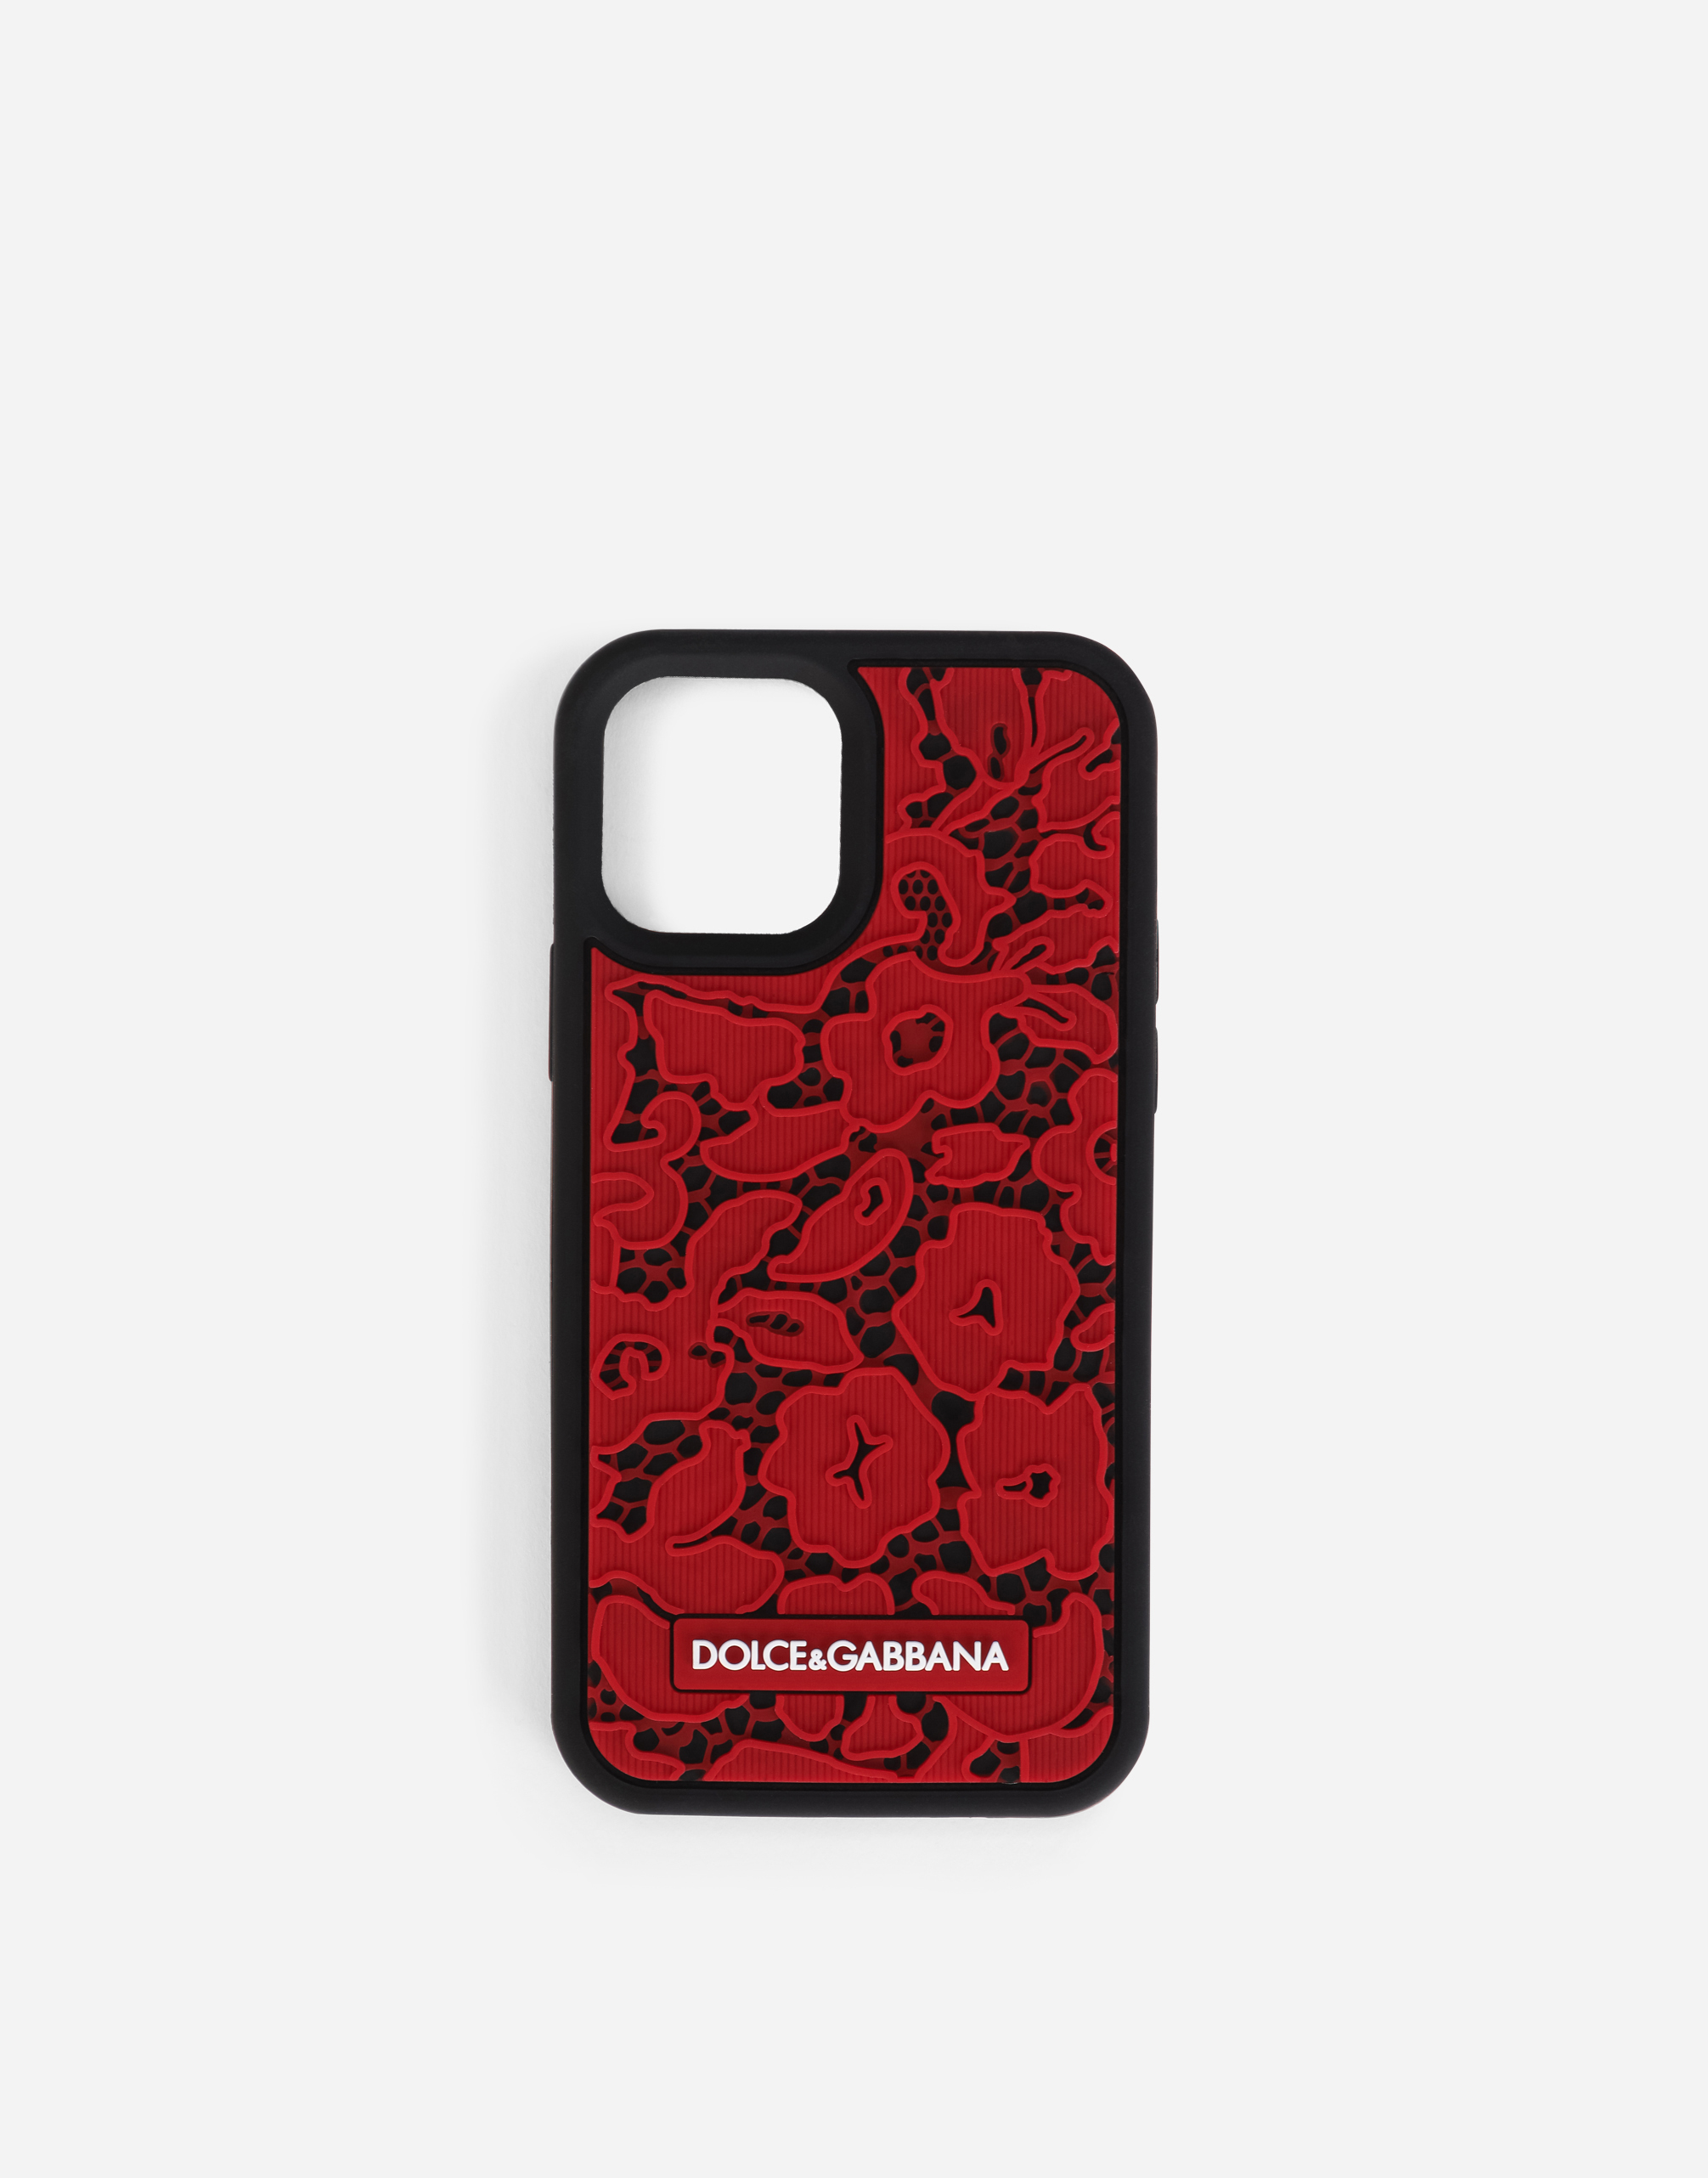 DOLCE & GABBANA LACE RUBBER IPHONE 12/12 PRO COVER